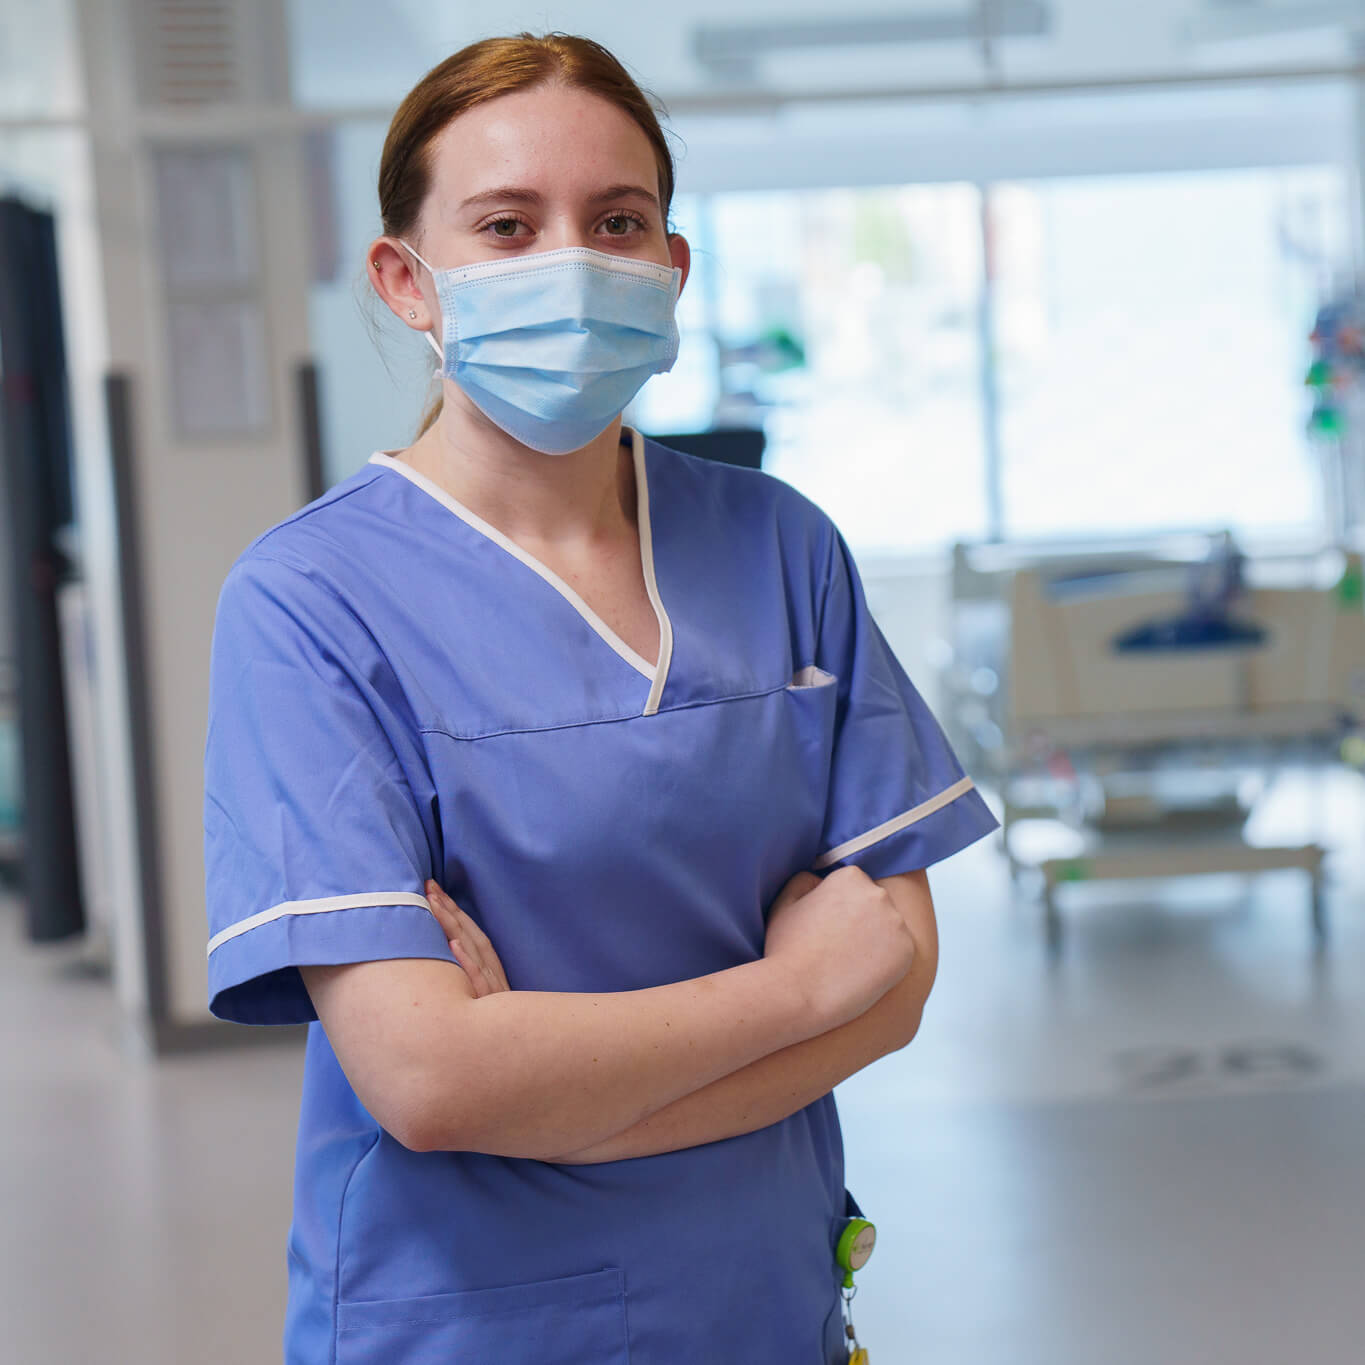 A female nurse wearing a blue scrub and a surgical mask stands with her arms crossed in a hospital corridor, looking directly at the camera.